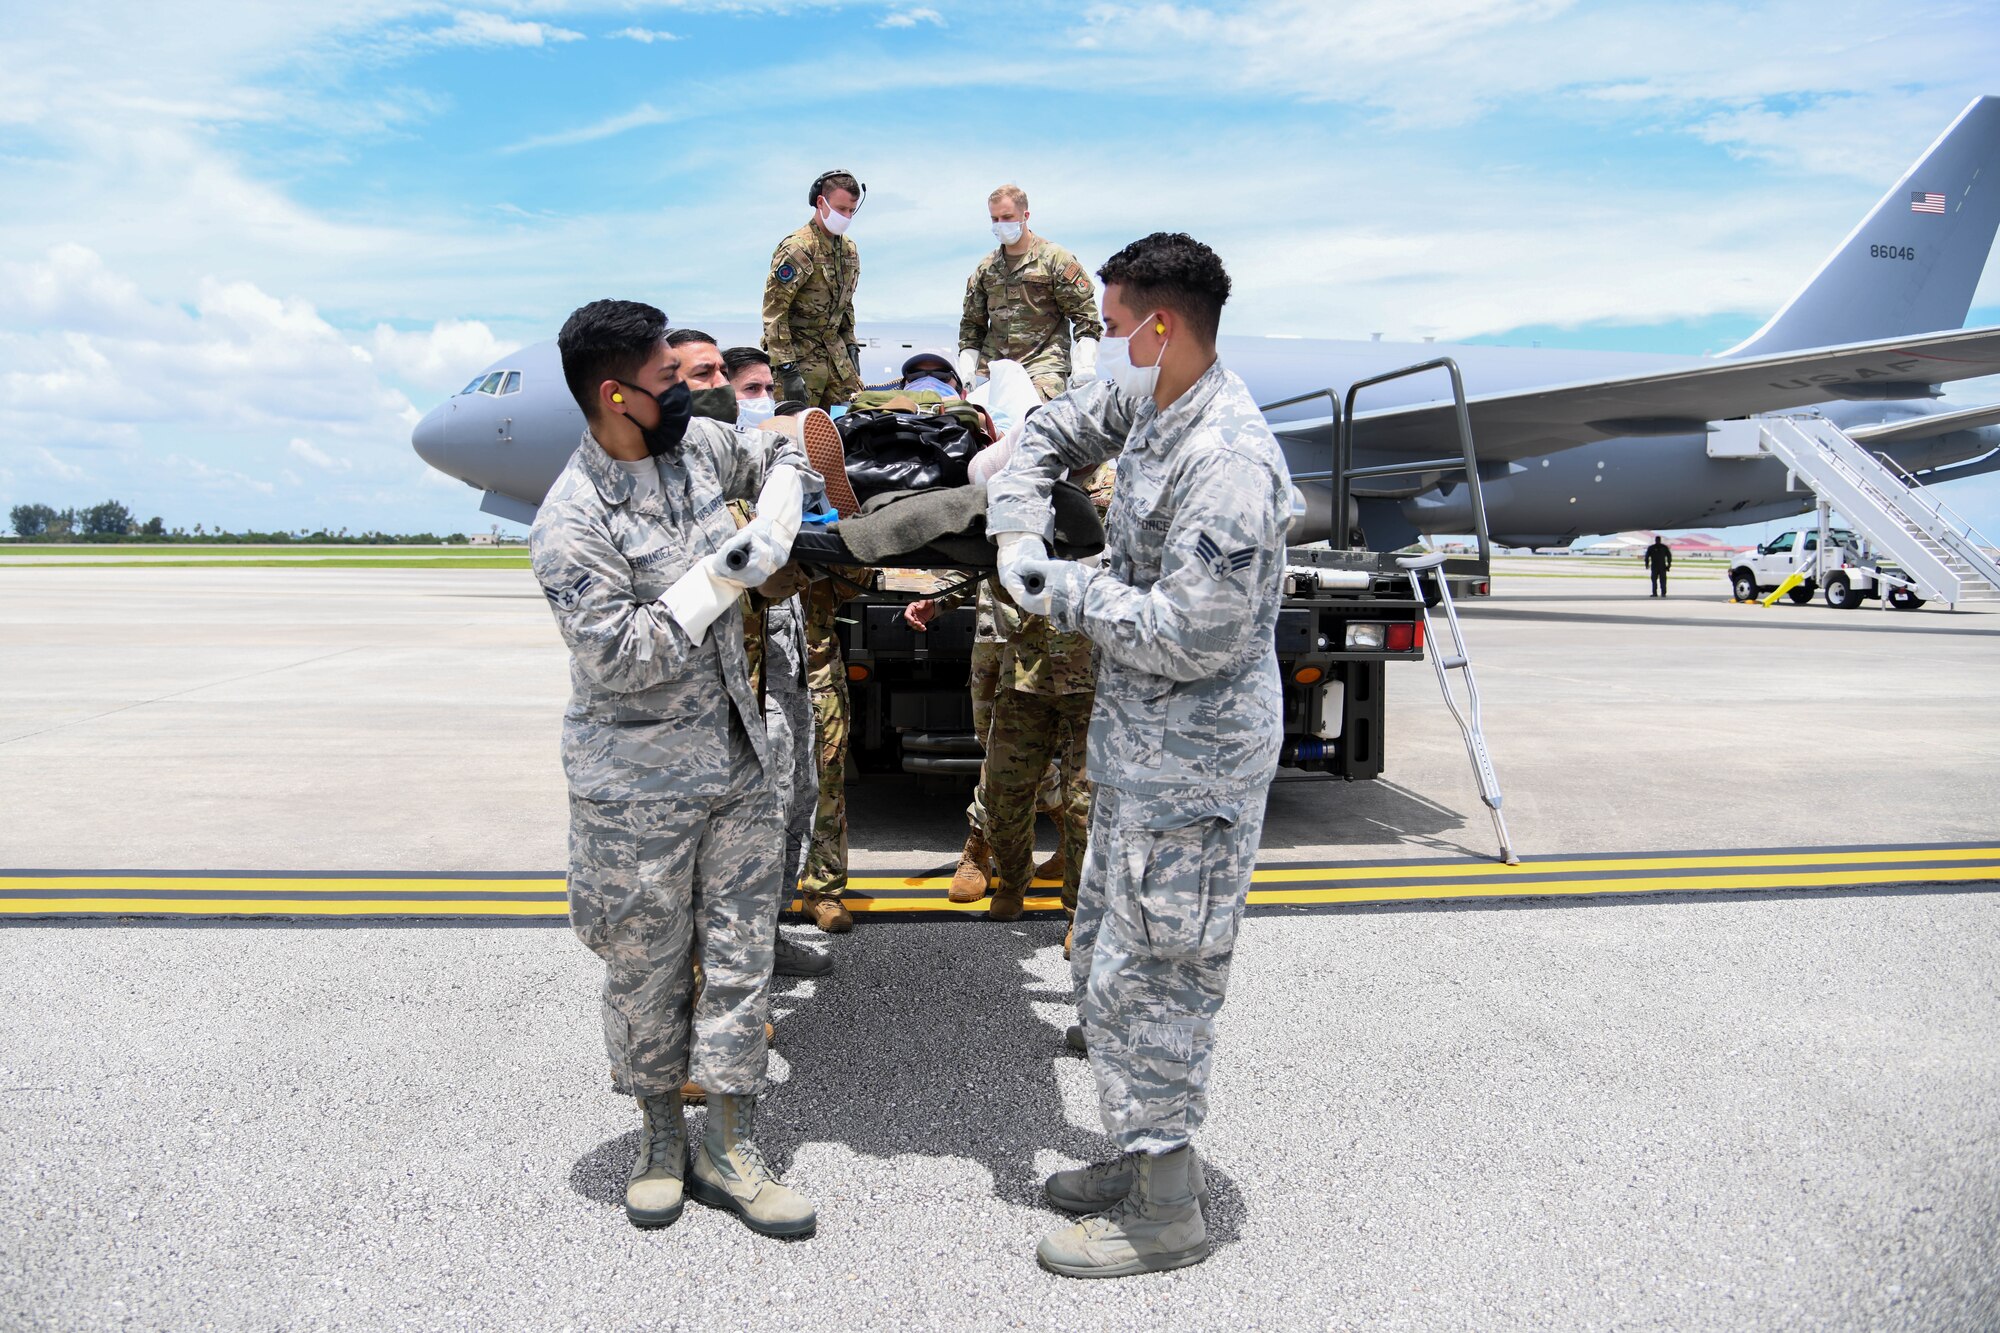 Airmen from the 45th Operational Medical Readiness Squadron, offload a patient July 10, 2020, at Patrick Air Force Base, Florida. The patients had recently returned from overseas to their home stations for follow-on care. (U.S. Air Force photo by Airman 1st Class Nilsa Garcia)